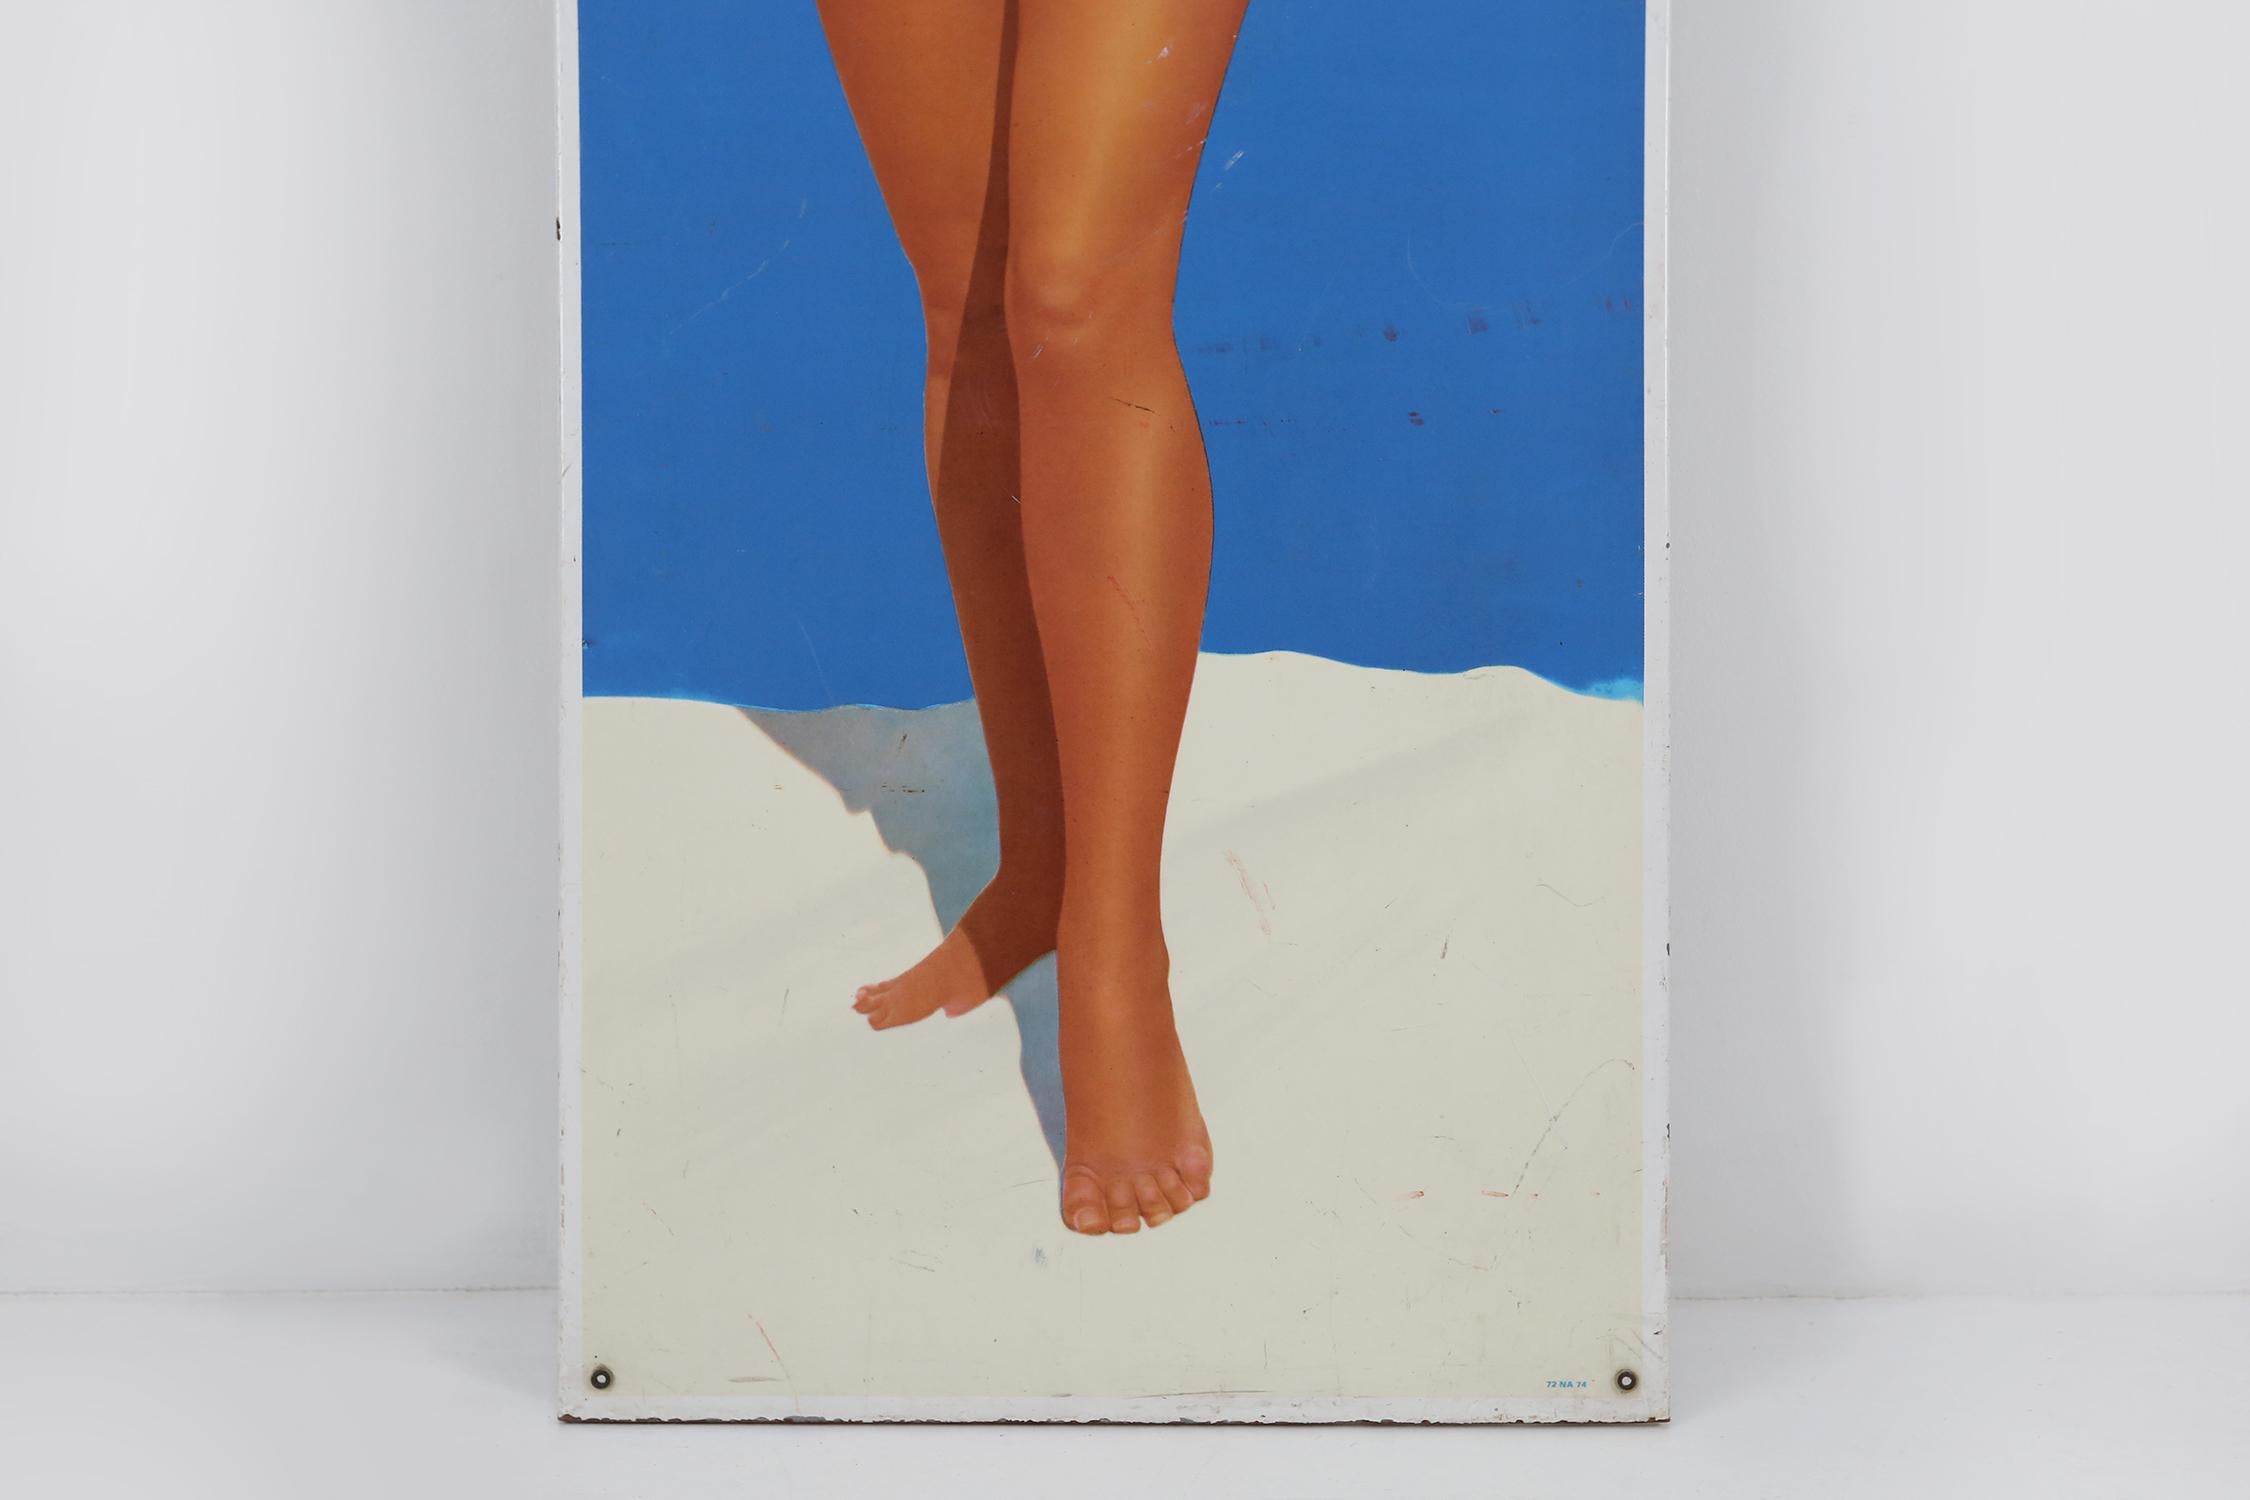 Late 20th Century Vintage Advertising Sign for Nivea, 1970